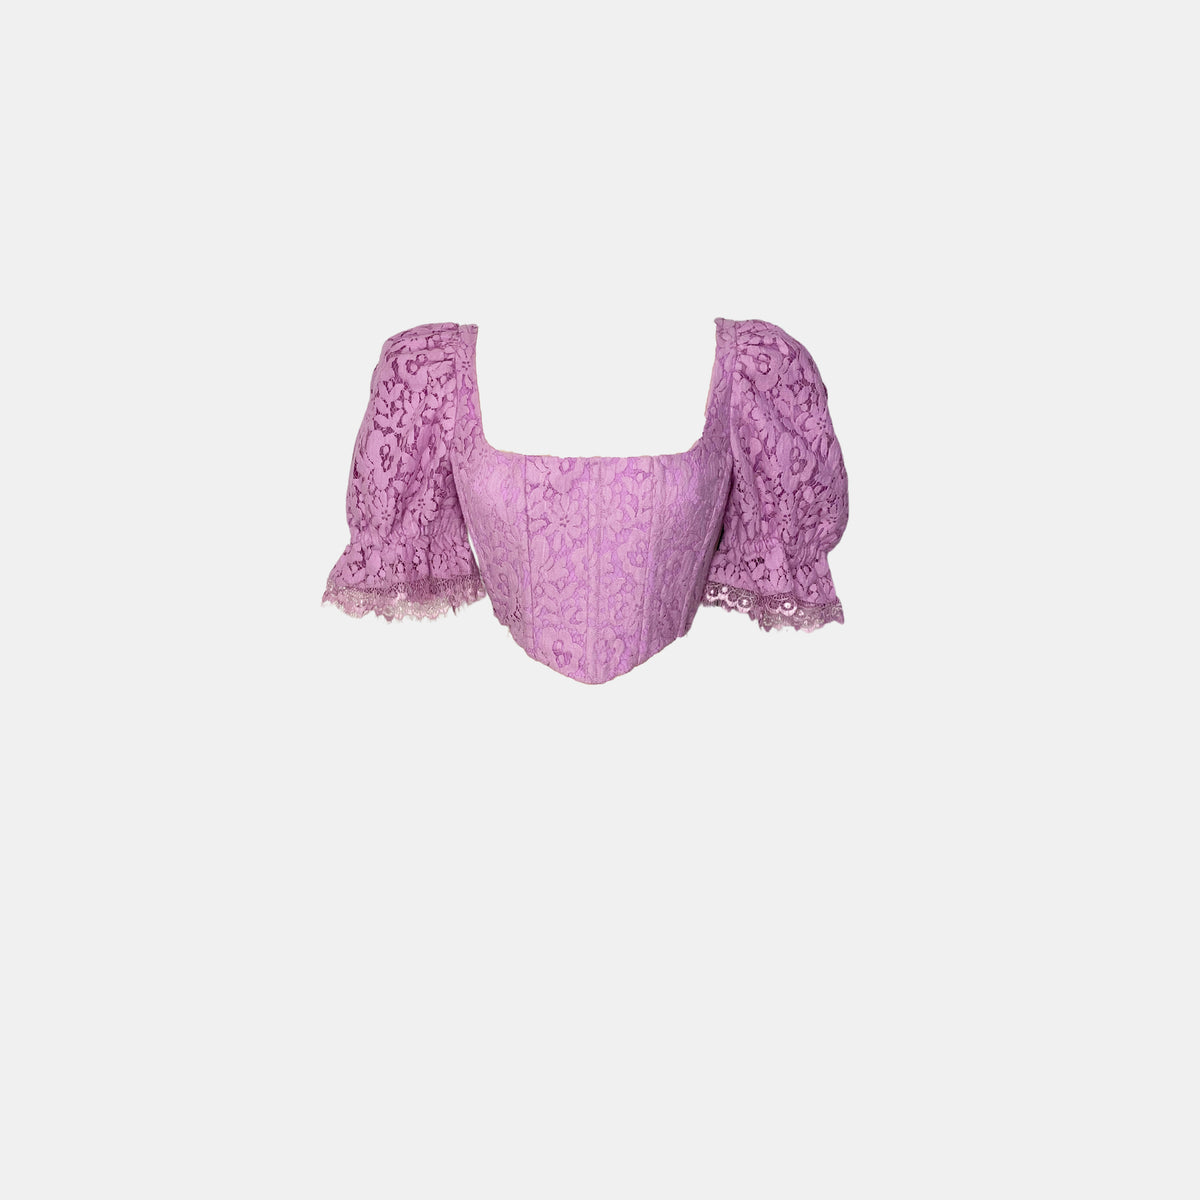 Saylor Xander Puff Sleeve Lace Top in Purple